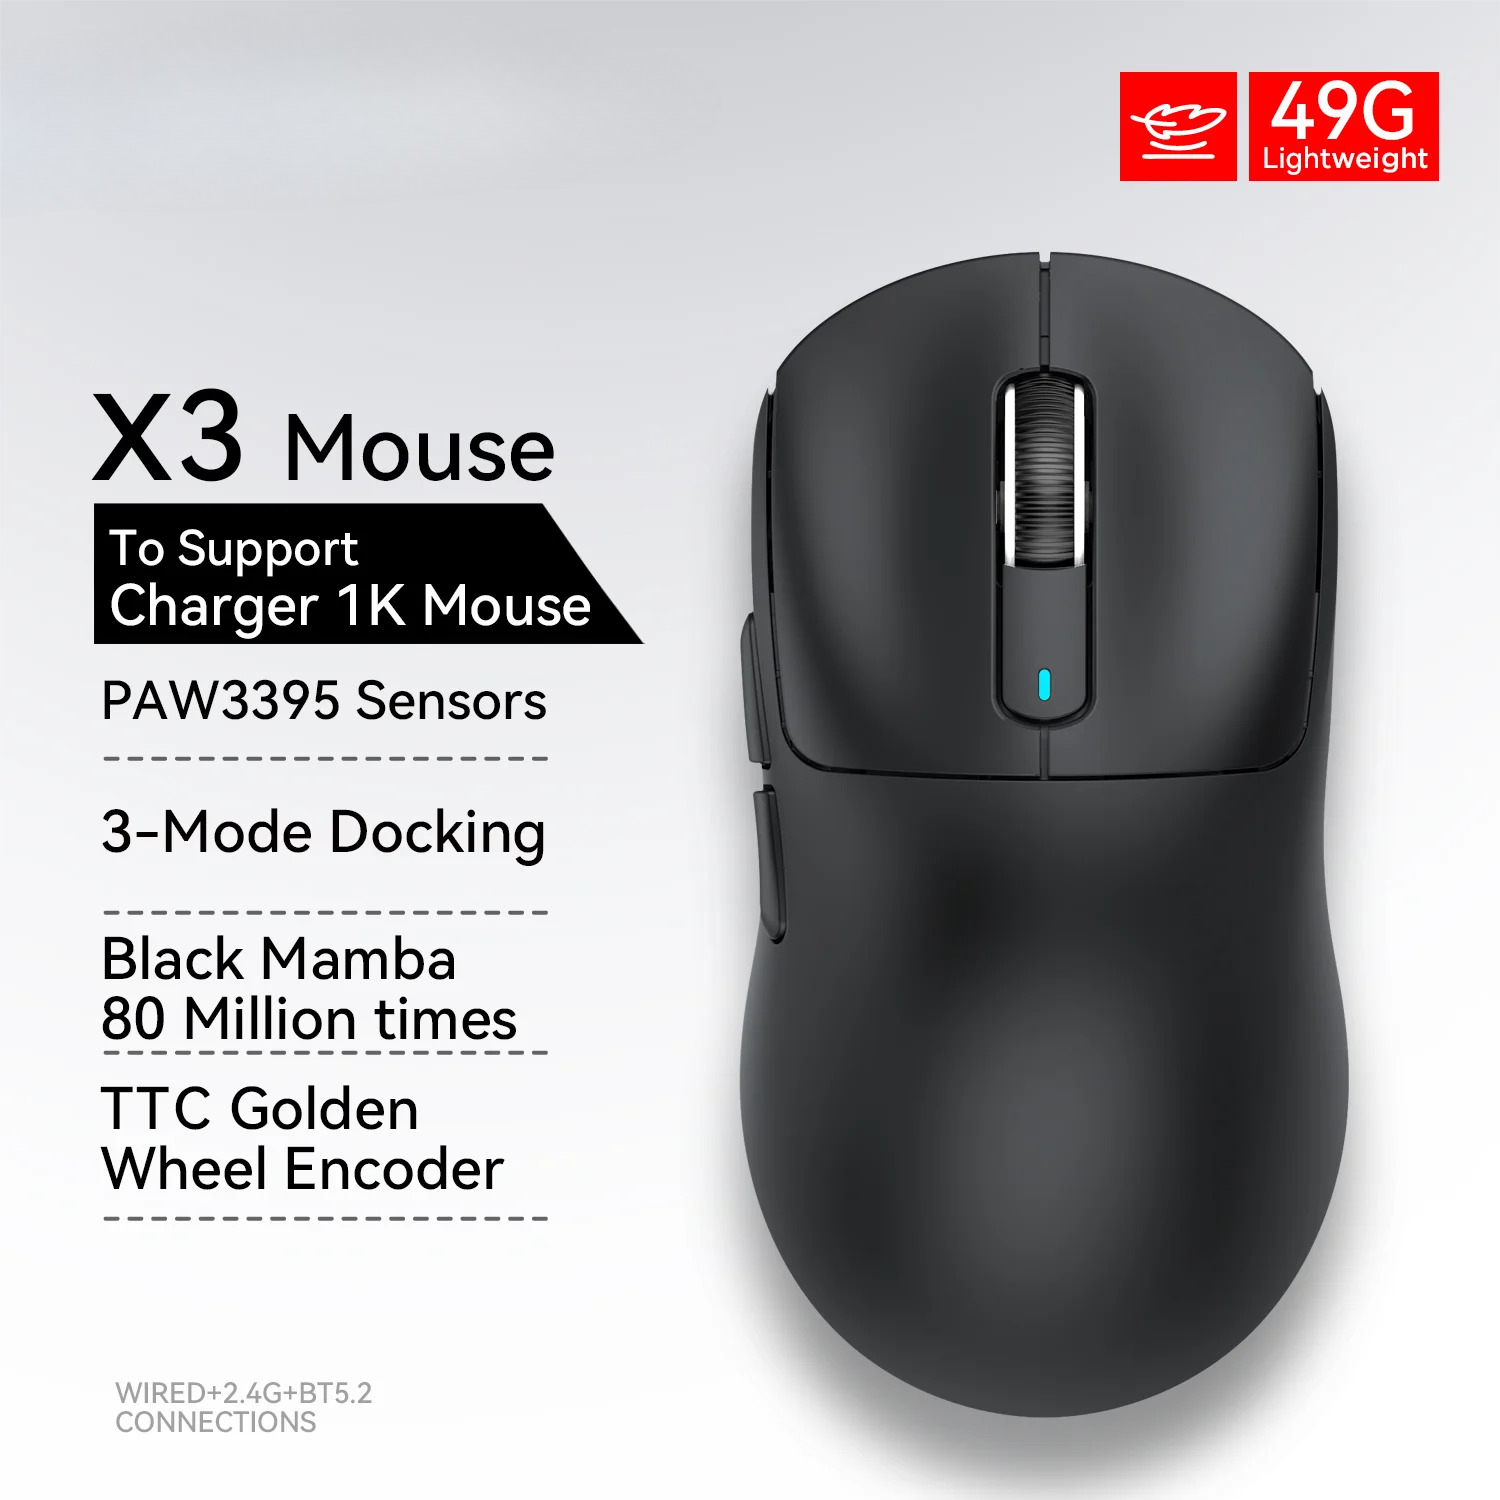 Wired Mode 8KHz Bluetooth Mouse,Tri-Mode,Wiredless 4KHz,Lightweight Gaming Mouse